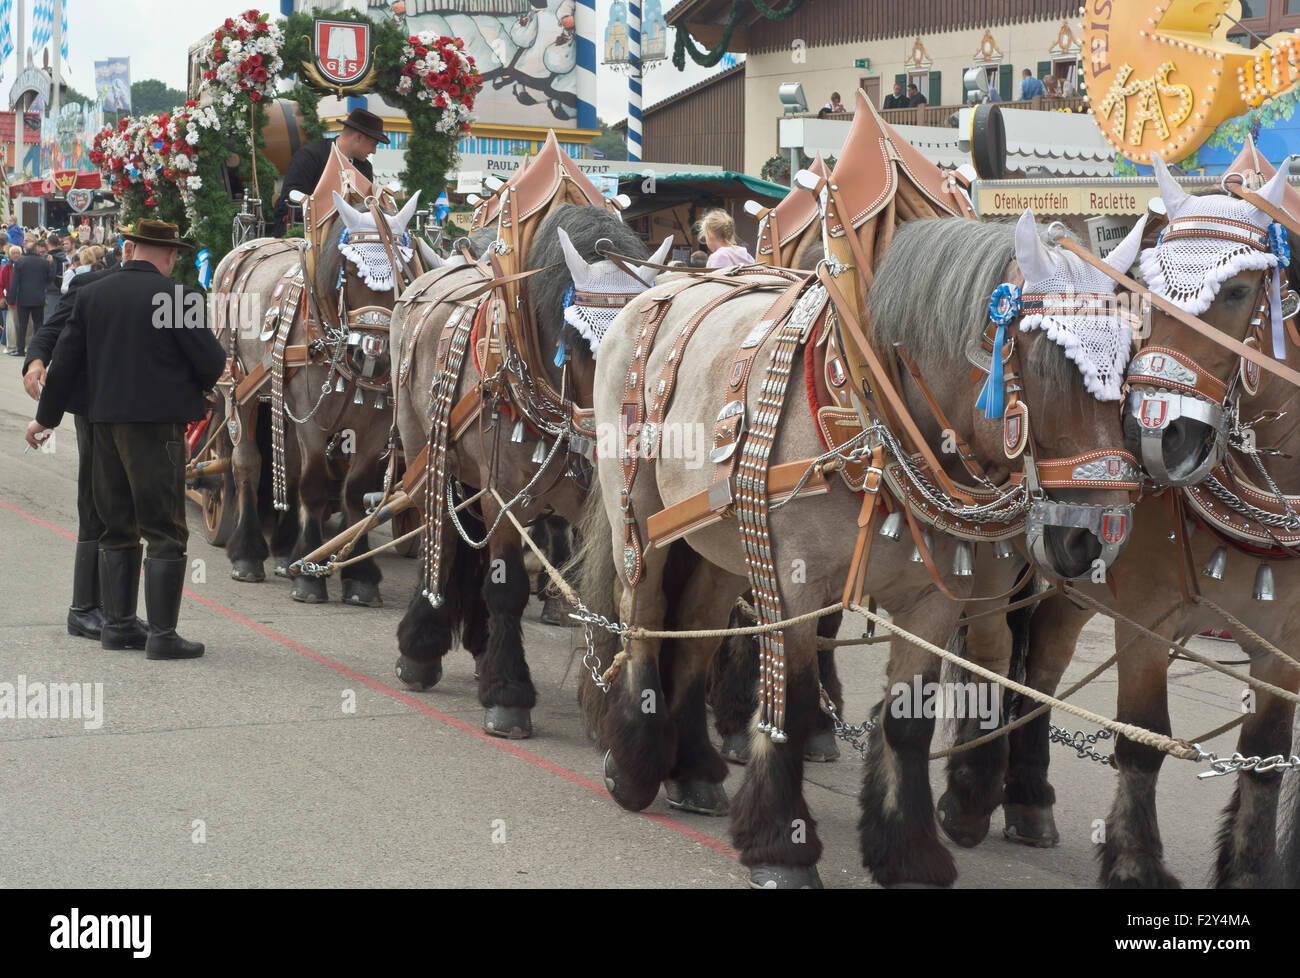 MUNICH, GERMANY – SEPT. 20, 2015: Spatenbrau Beer Carriage Entertaining Crowds at the annual Okotoberfest. The Festival runs from September 19th until October 4th 2015 in Munich, Germany. Stock Photo